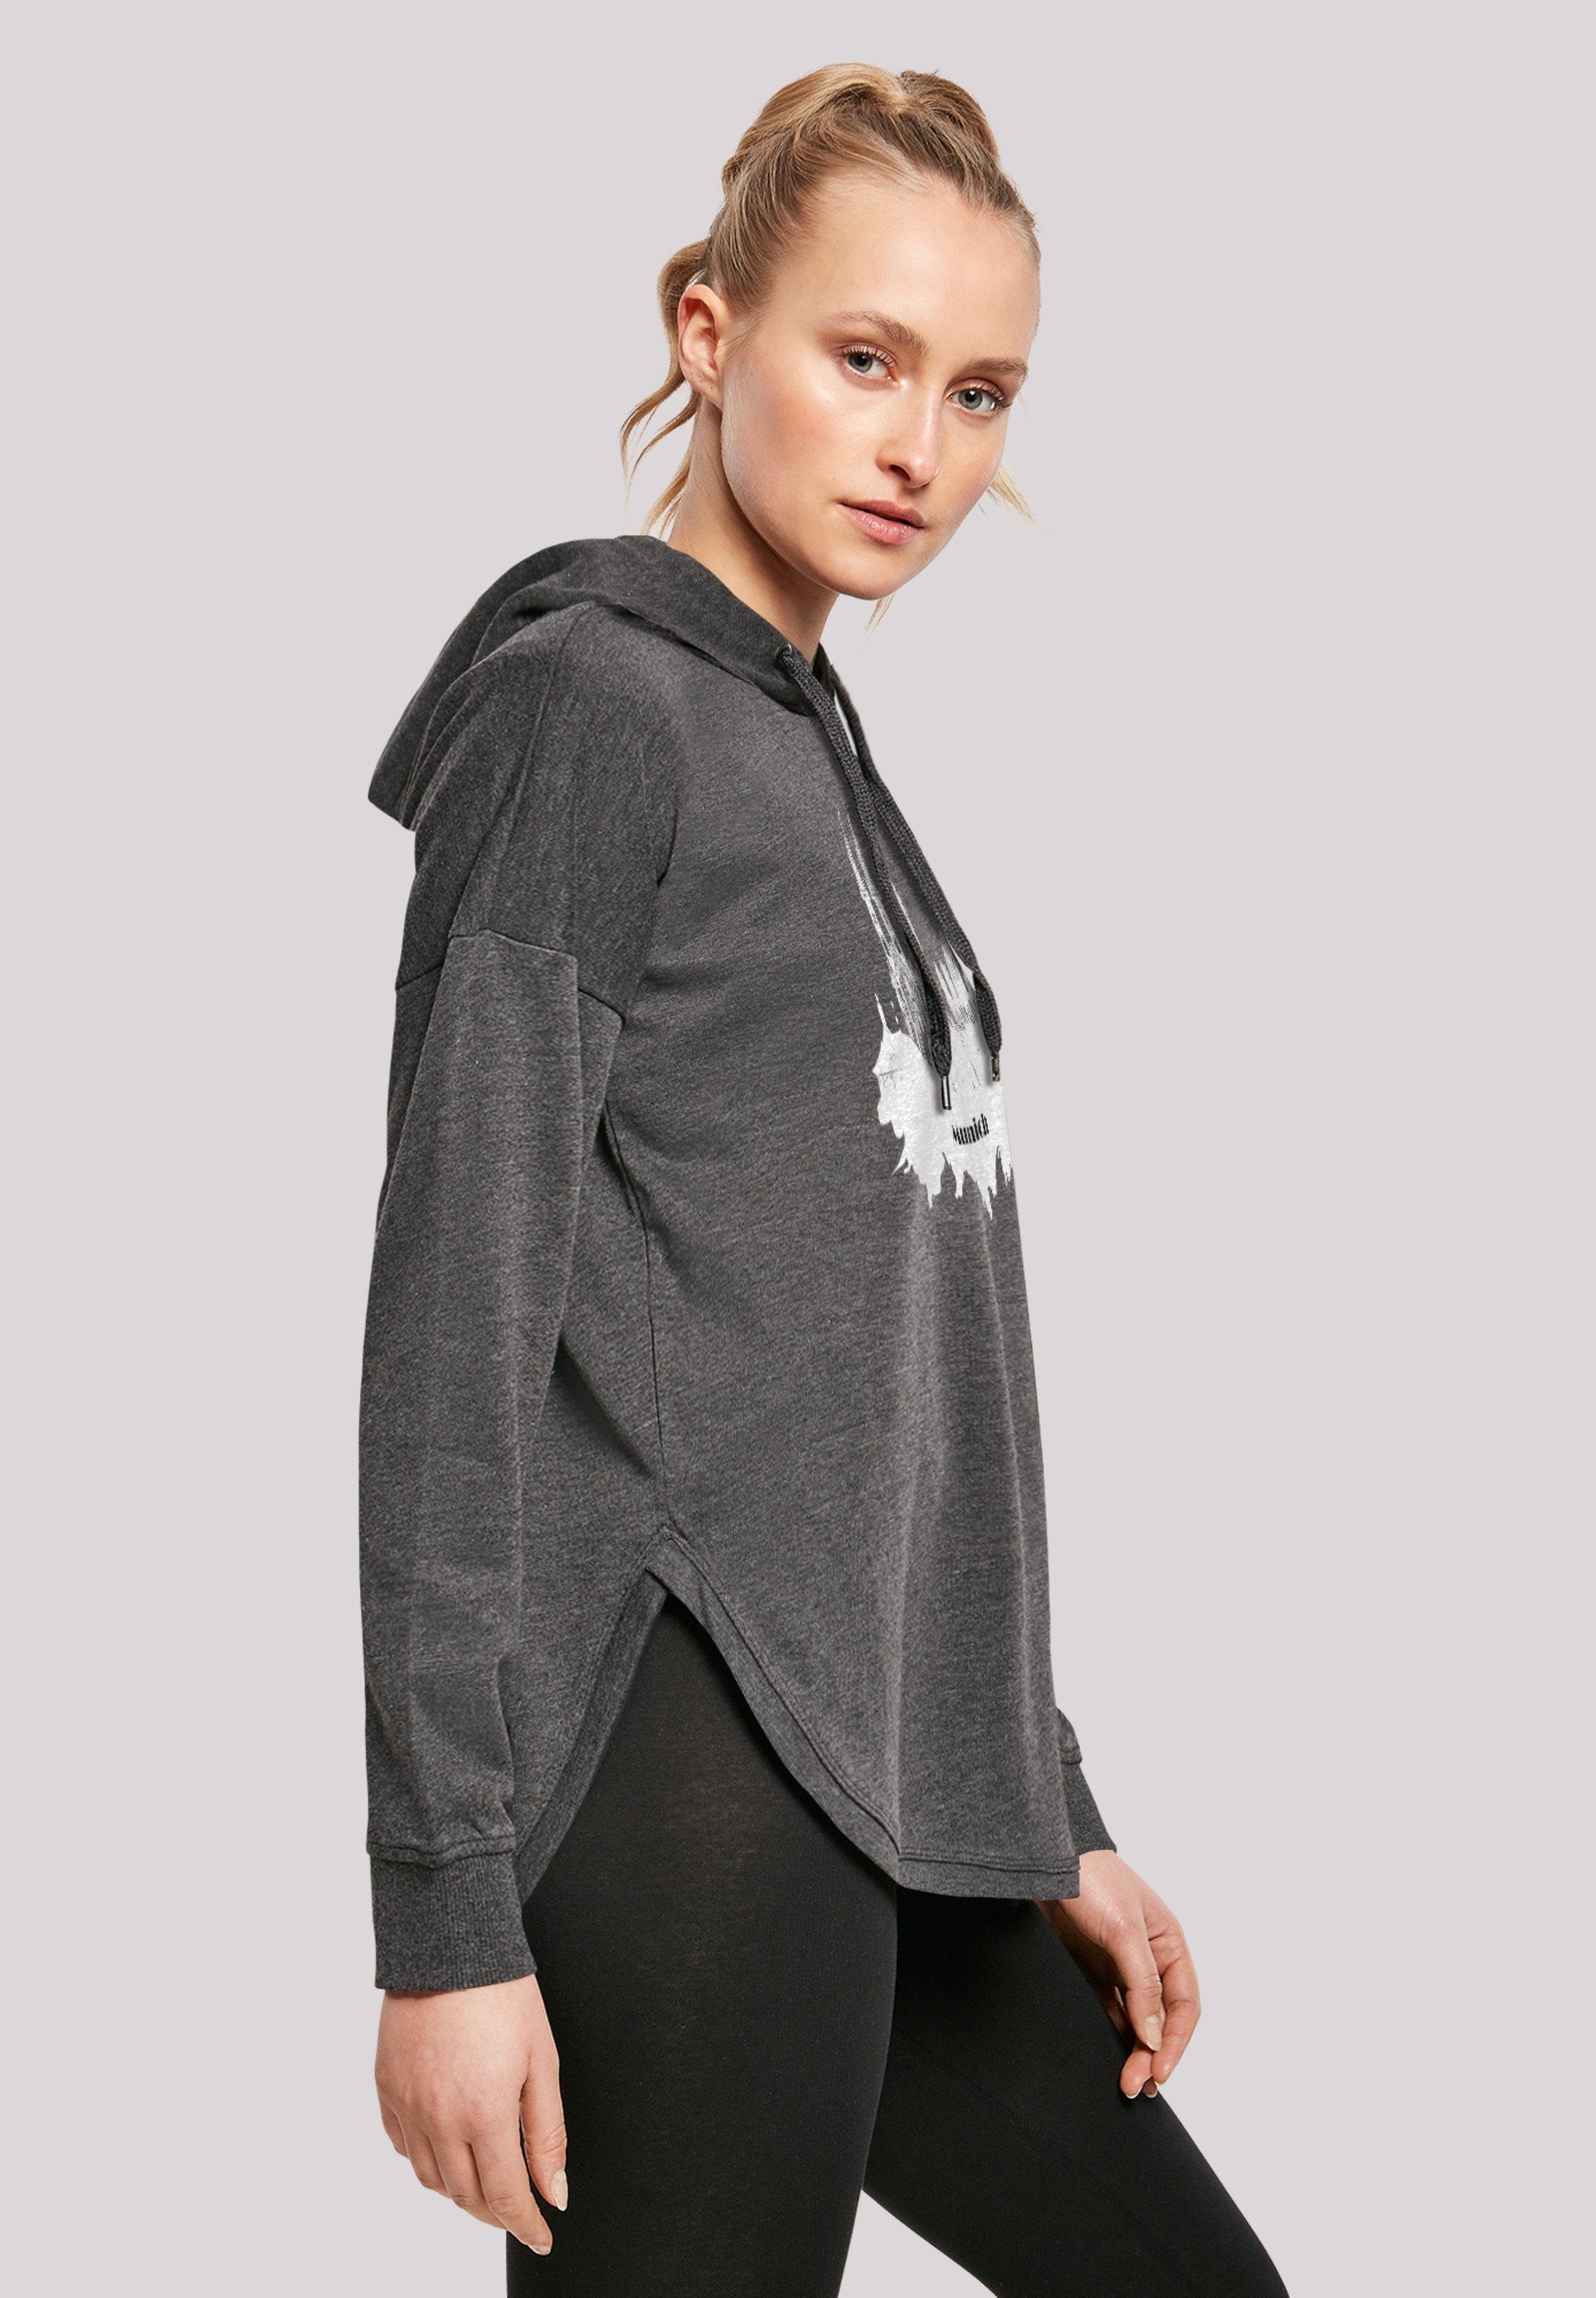 F4NT4STIC Kapuzenpullover Cities Collection - skyline charcoal Munich Print